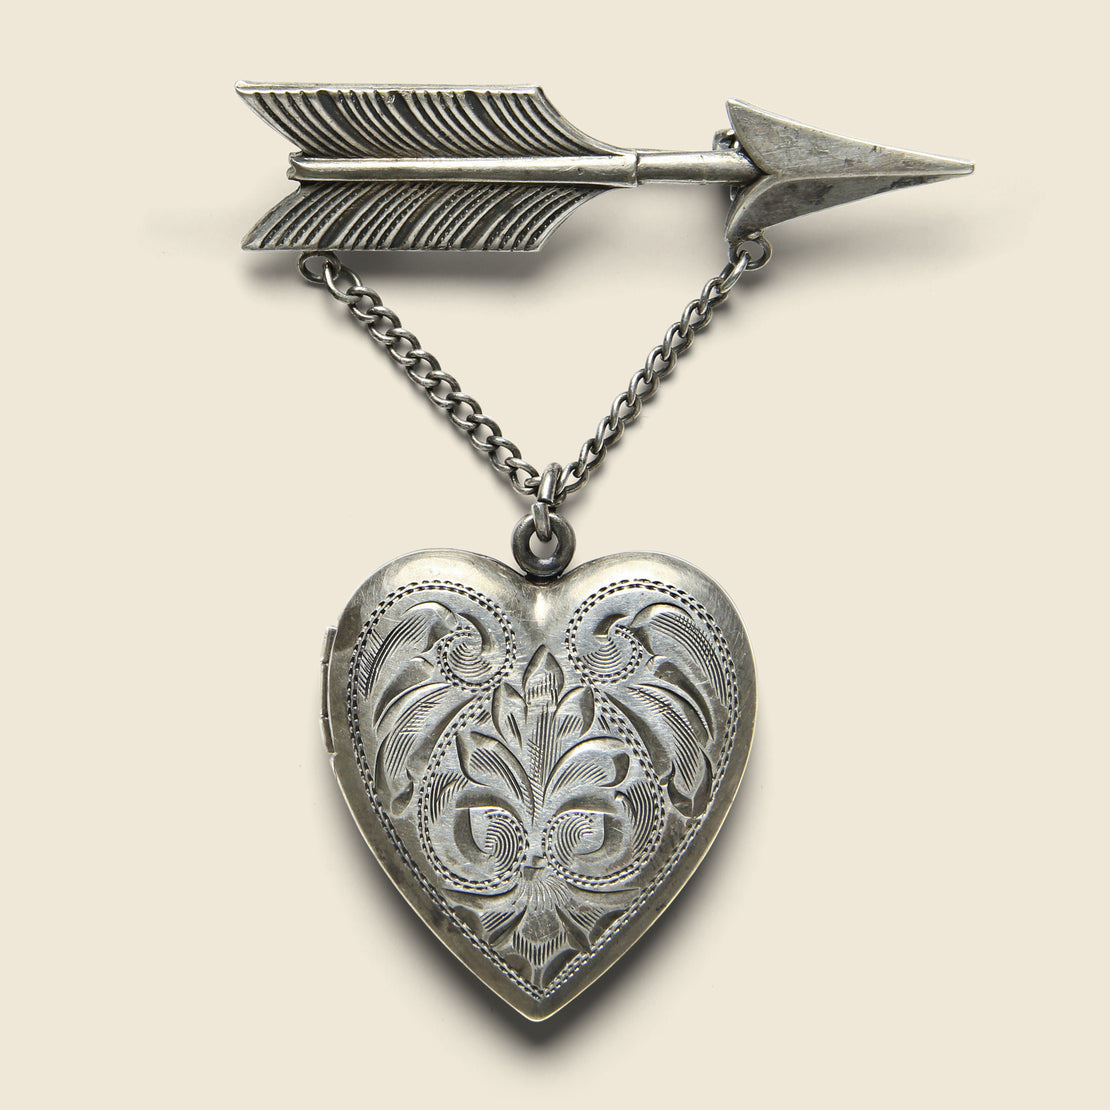 Vintage Arrow & Etched Heart Locket Pin - Sterling